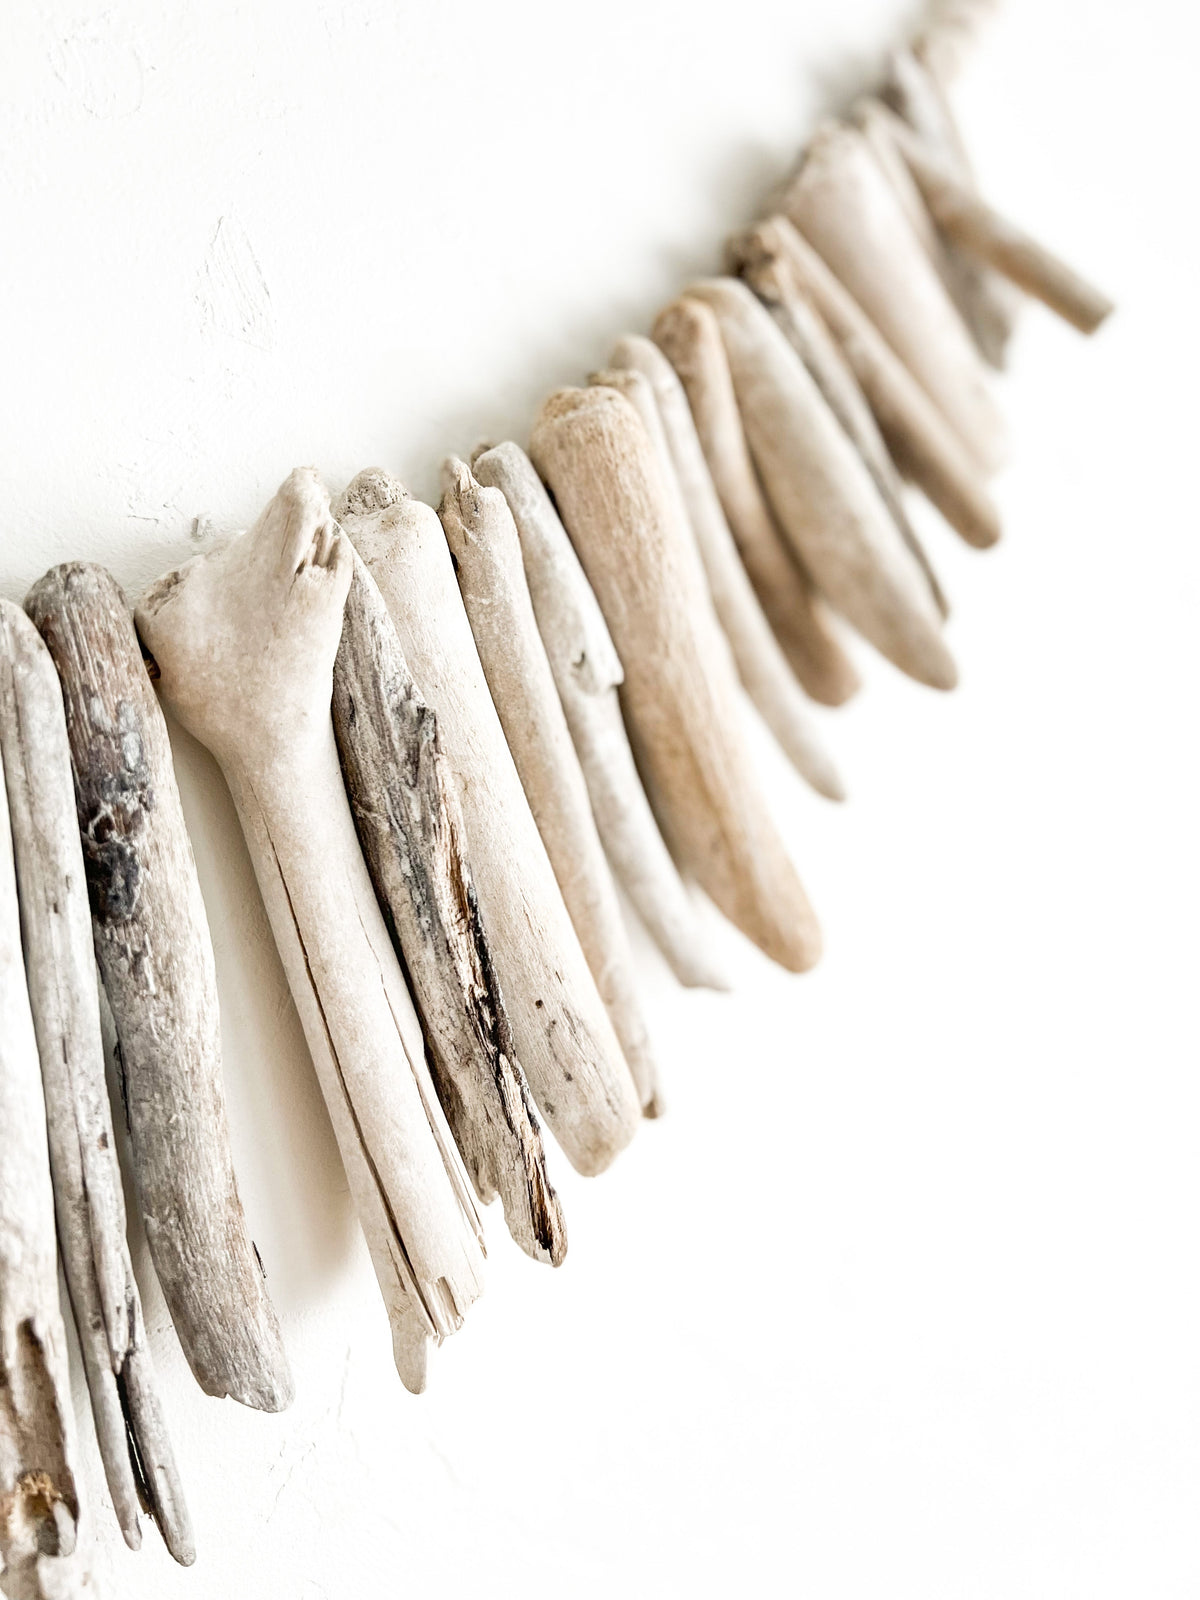 This whitewashed driftwood hanging showcases simplistic beauty with natural textures & details that can only be found in nature. Adding an element of coastal & rustic charm, this piece is sure to make a beautiful focal point in your space.